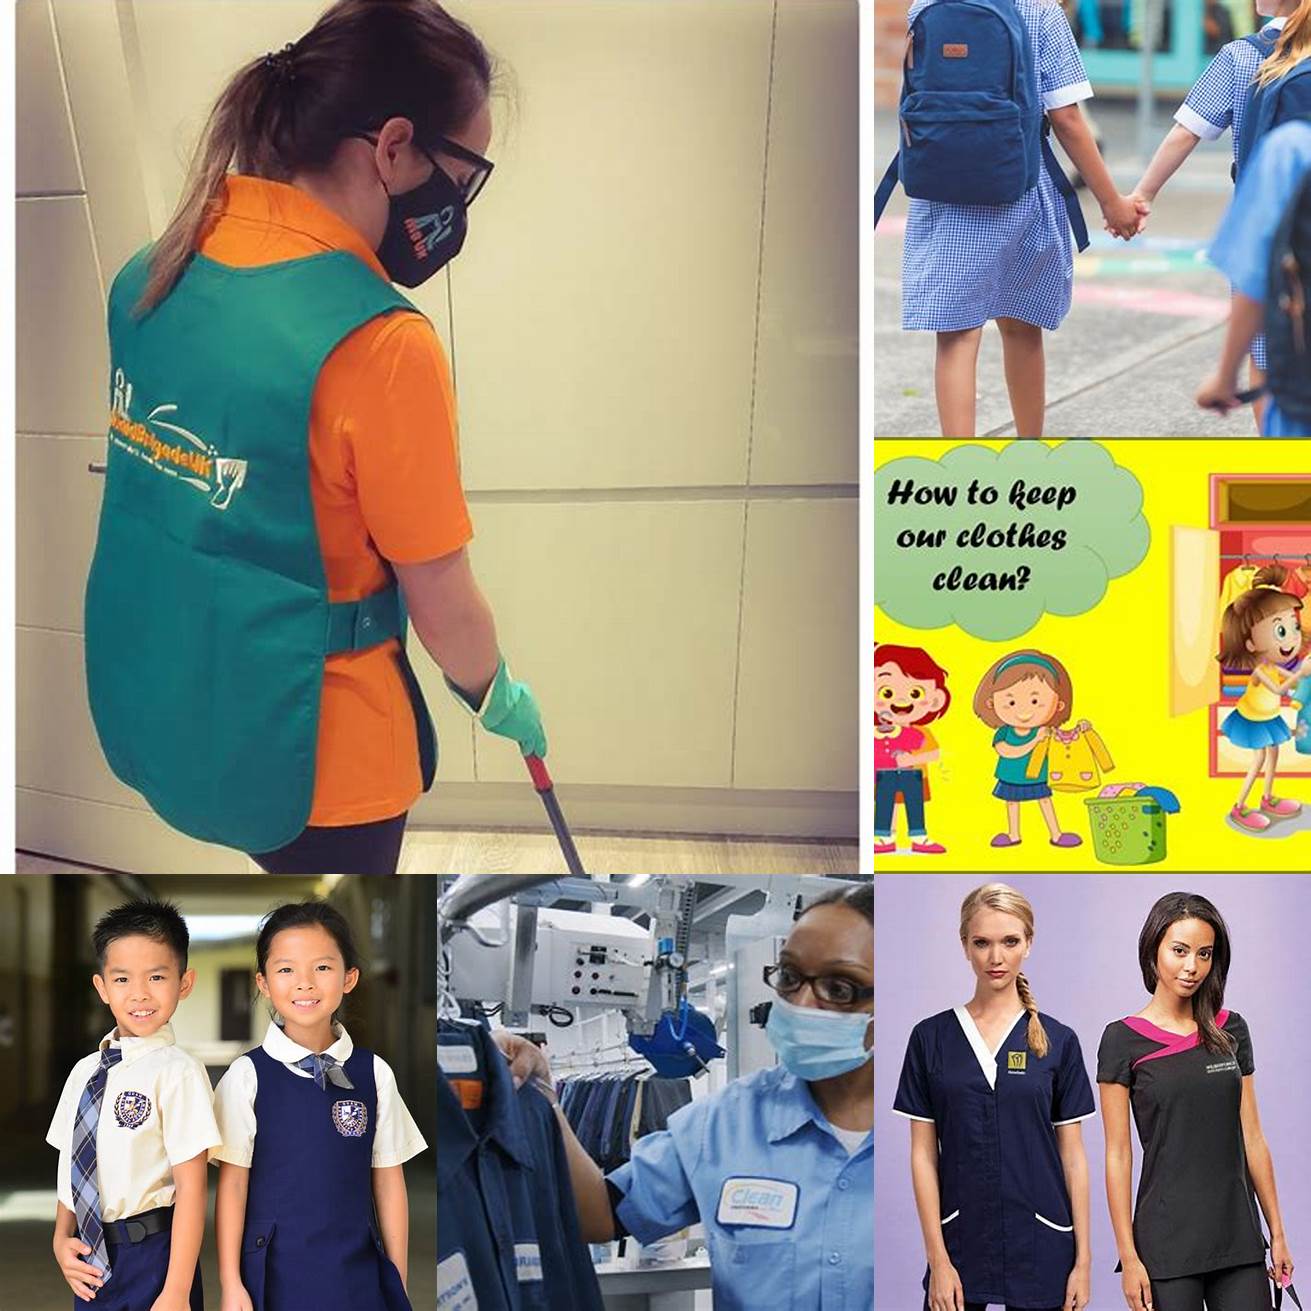 2 Consider buying a few extra pieces of clothing to ensure that your child has a clean uniform to wear every day